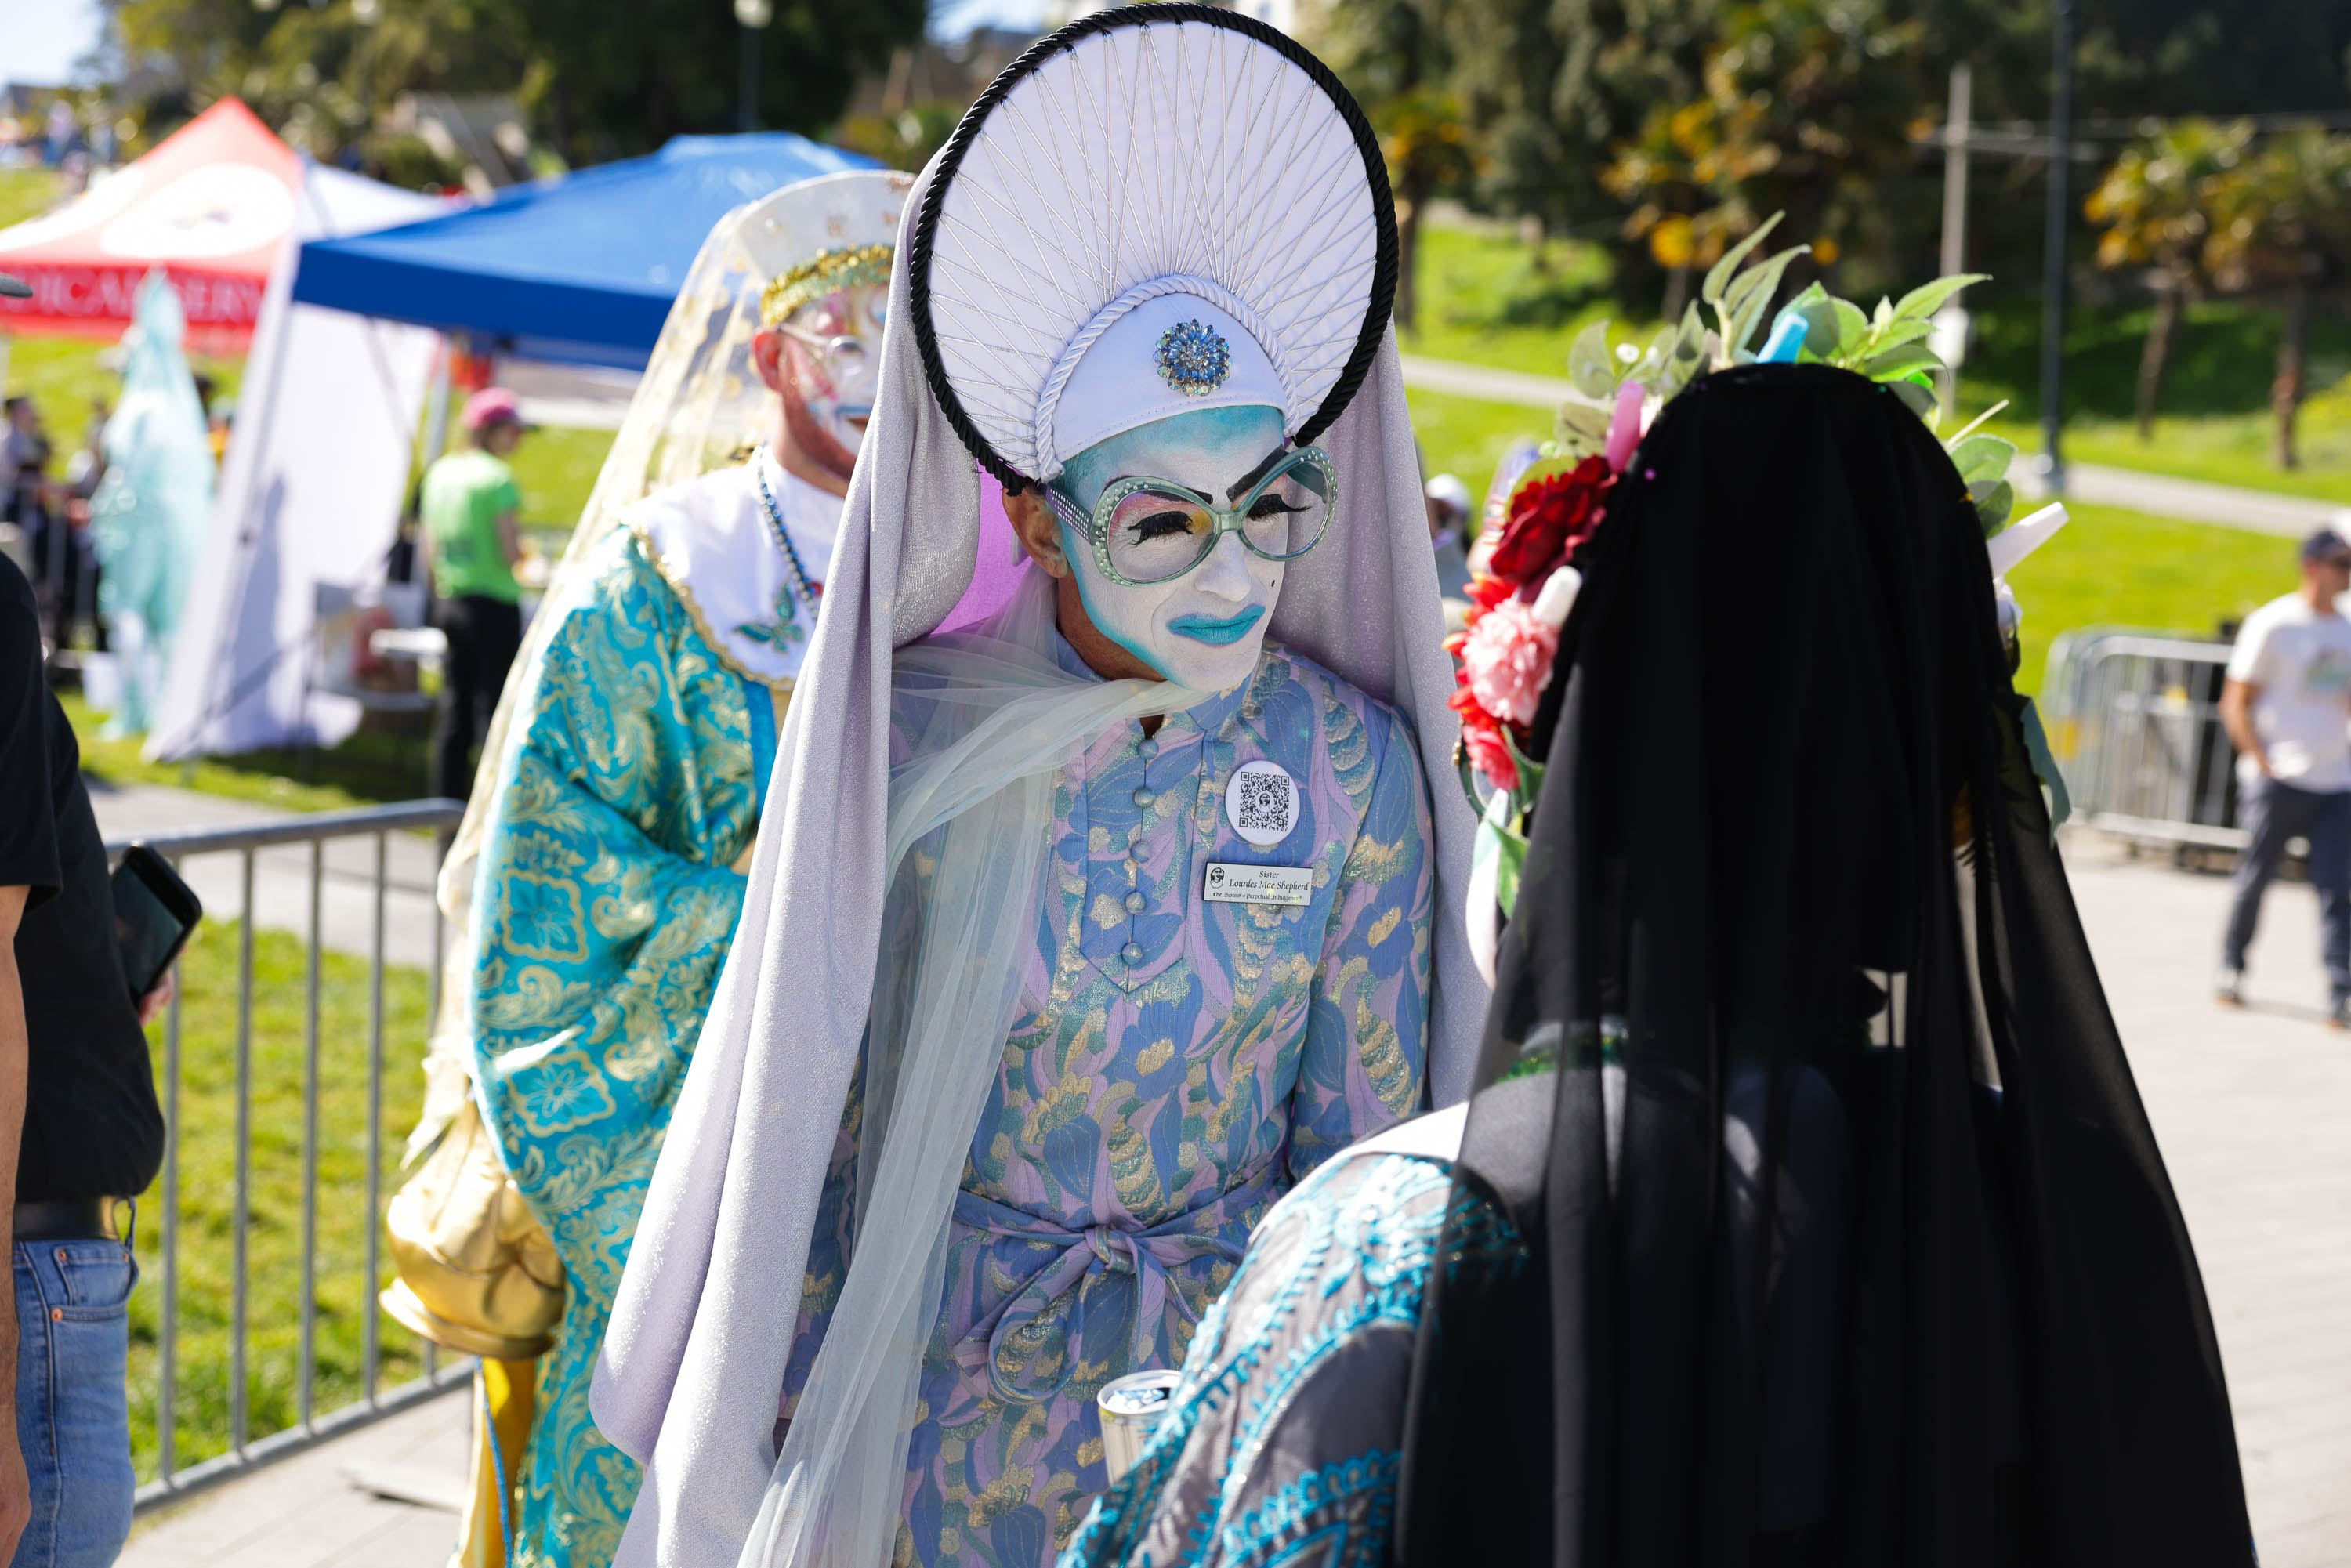 Individuals in elaborate costumes with face paint, one with a headdress, at an outdoor event.